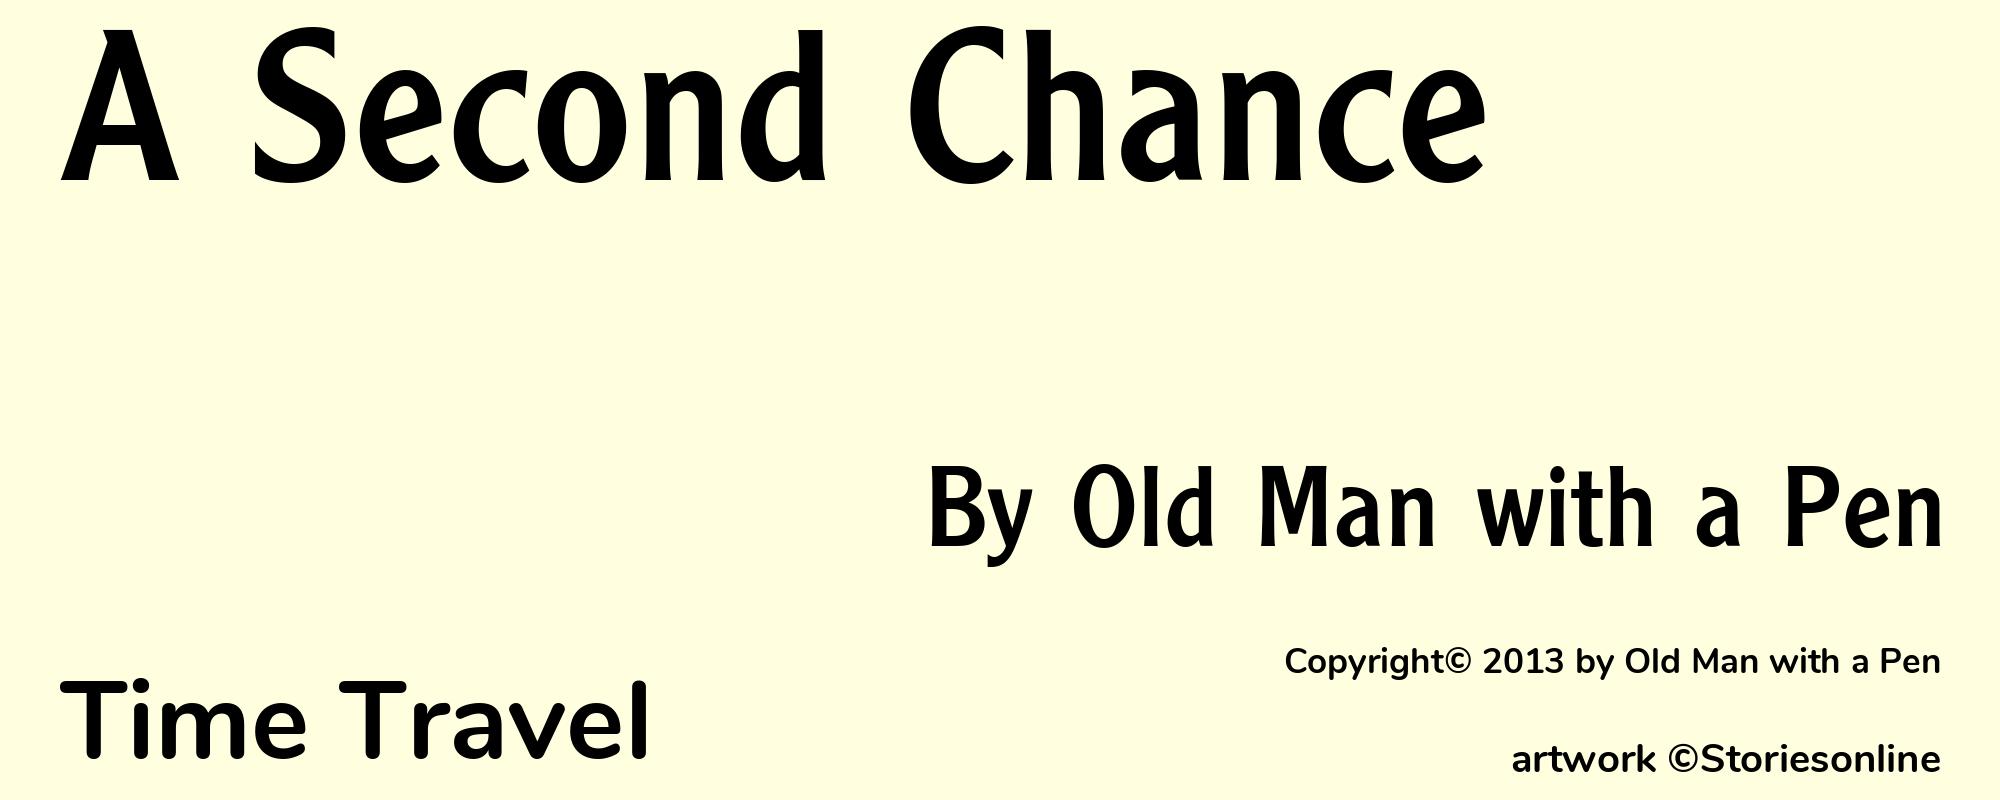 A Second Chance - Cover